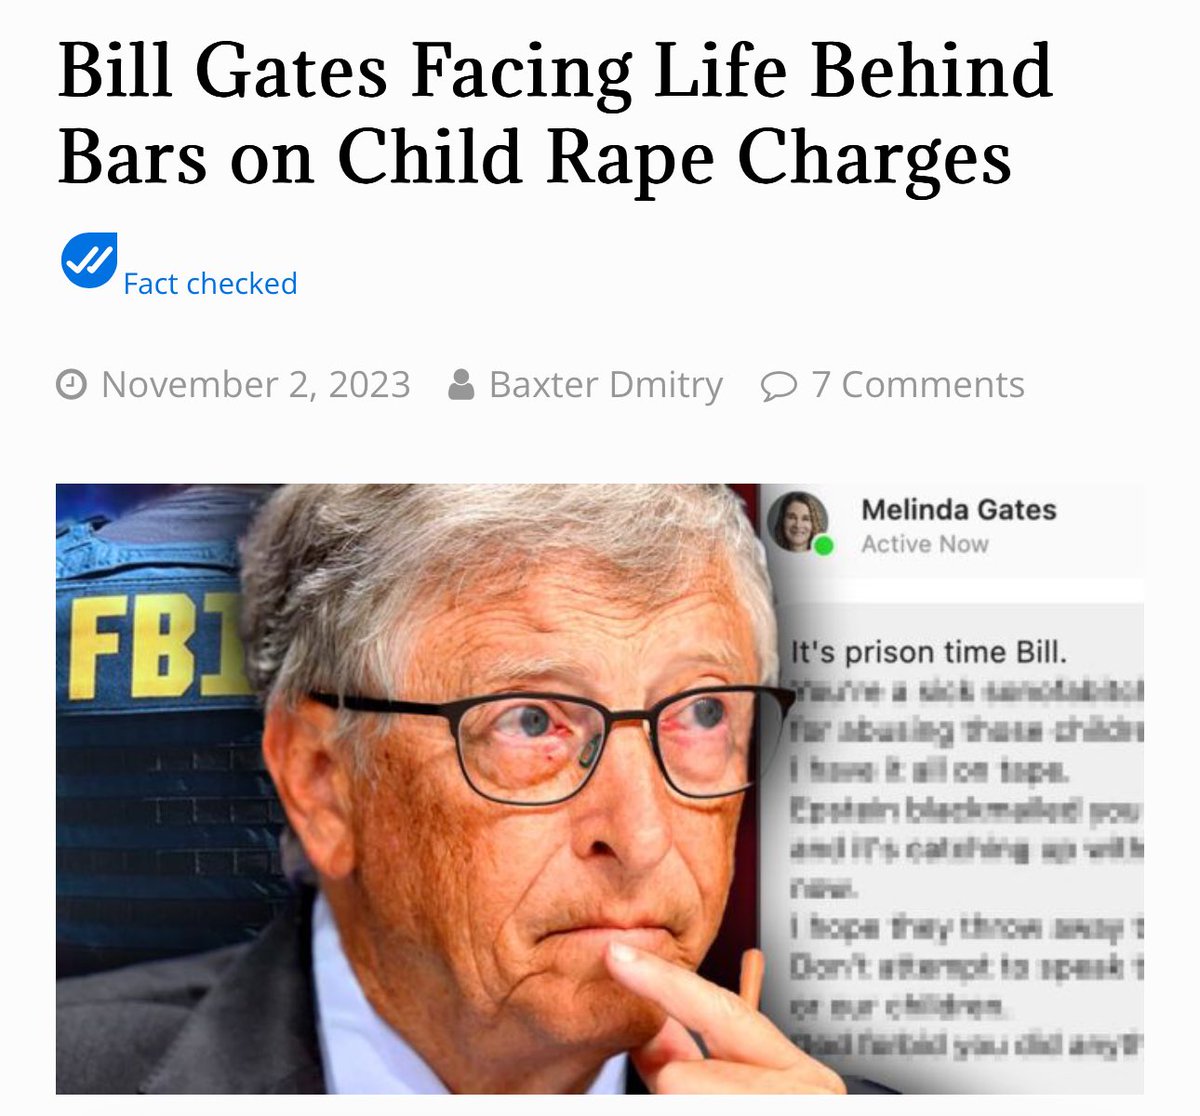 Bill Gates has already lost his marriage due his friendship with the convicted pedophile Jeffrey Epstein, but he is about to lose a whole lot more, according to investigators who revealed the globalist billionaire is about to be thrown under the bus and prosecuted on child rape…